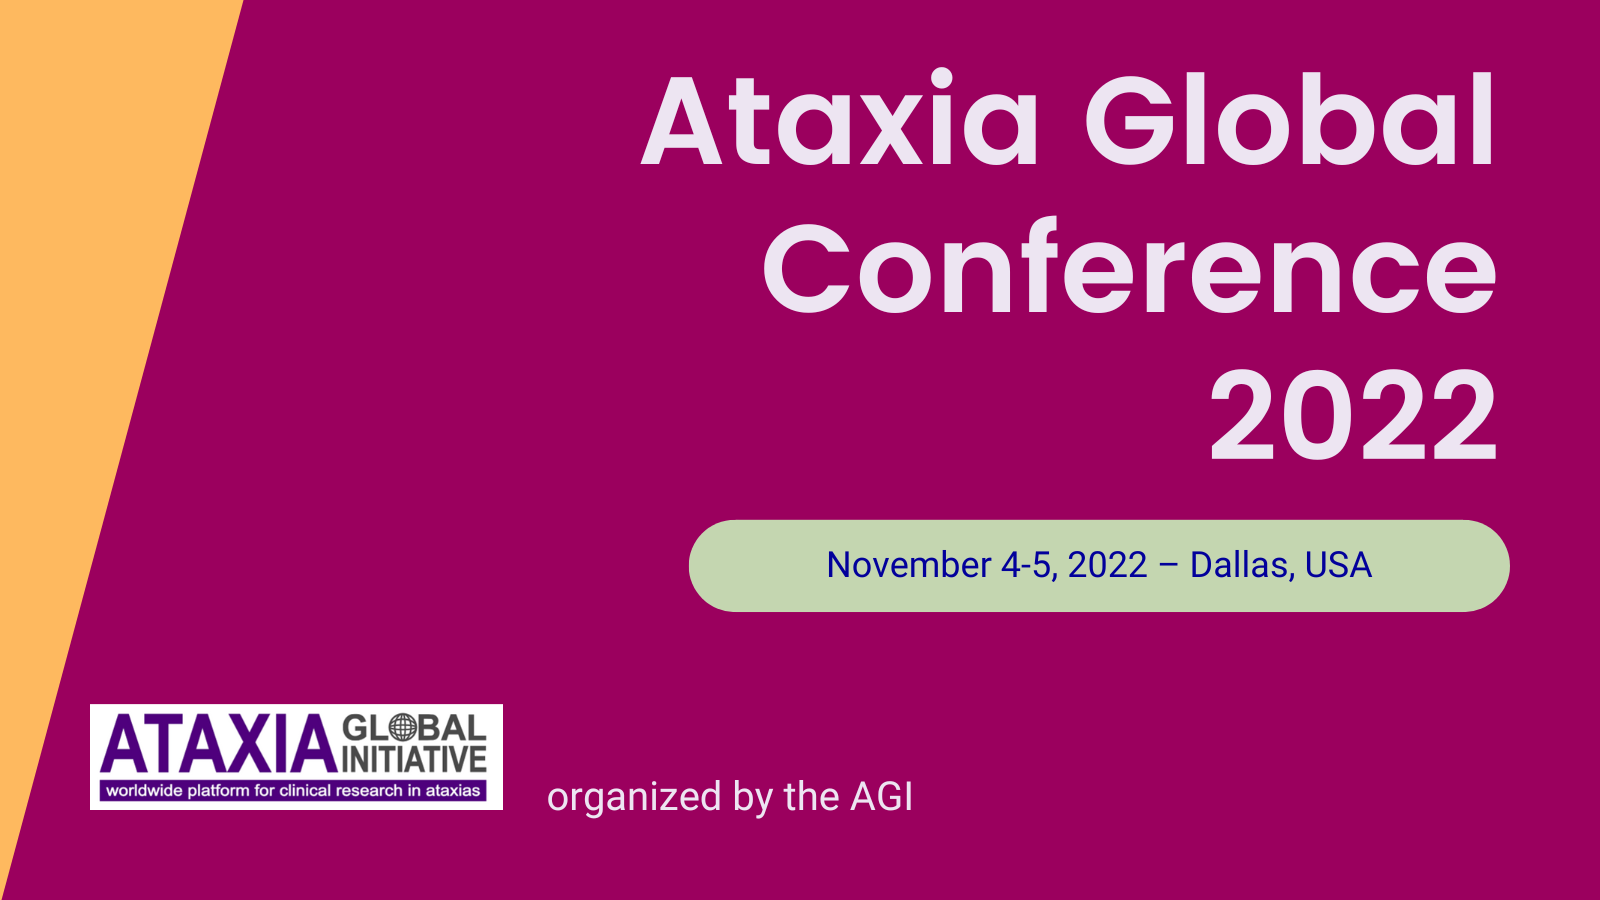 Ataxia Global Conference 2022